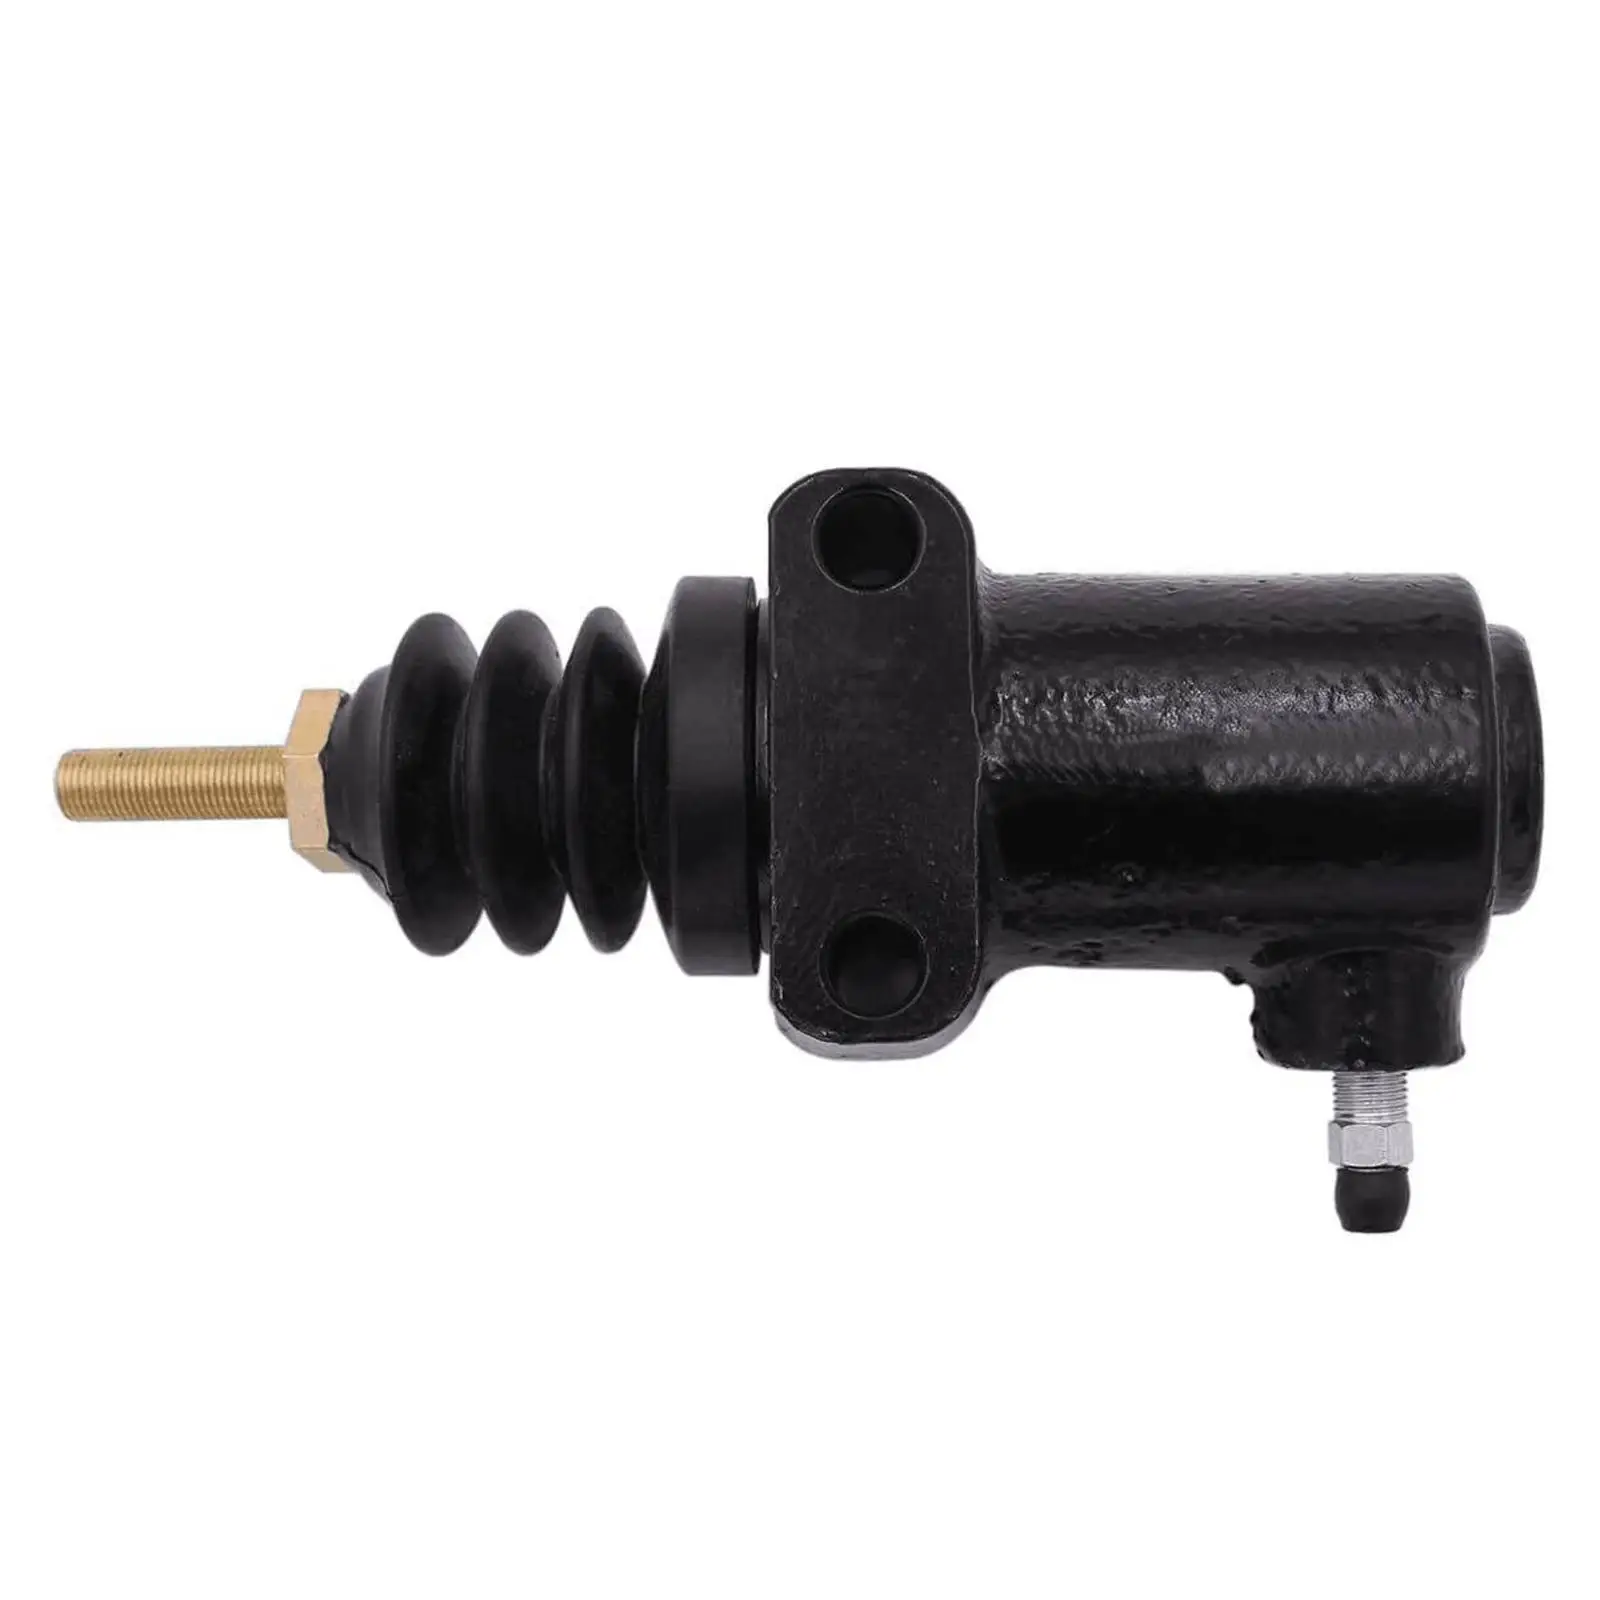 Truck Clutch Slave Cylinder 8075008 8079571 for Vnl Direct Replaces Spare Parts Accessory Professional